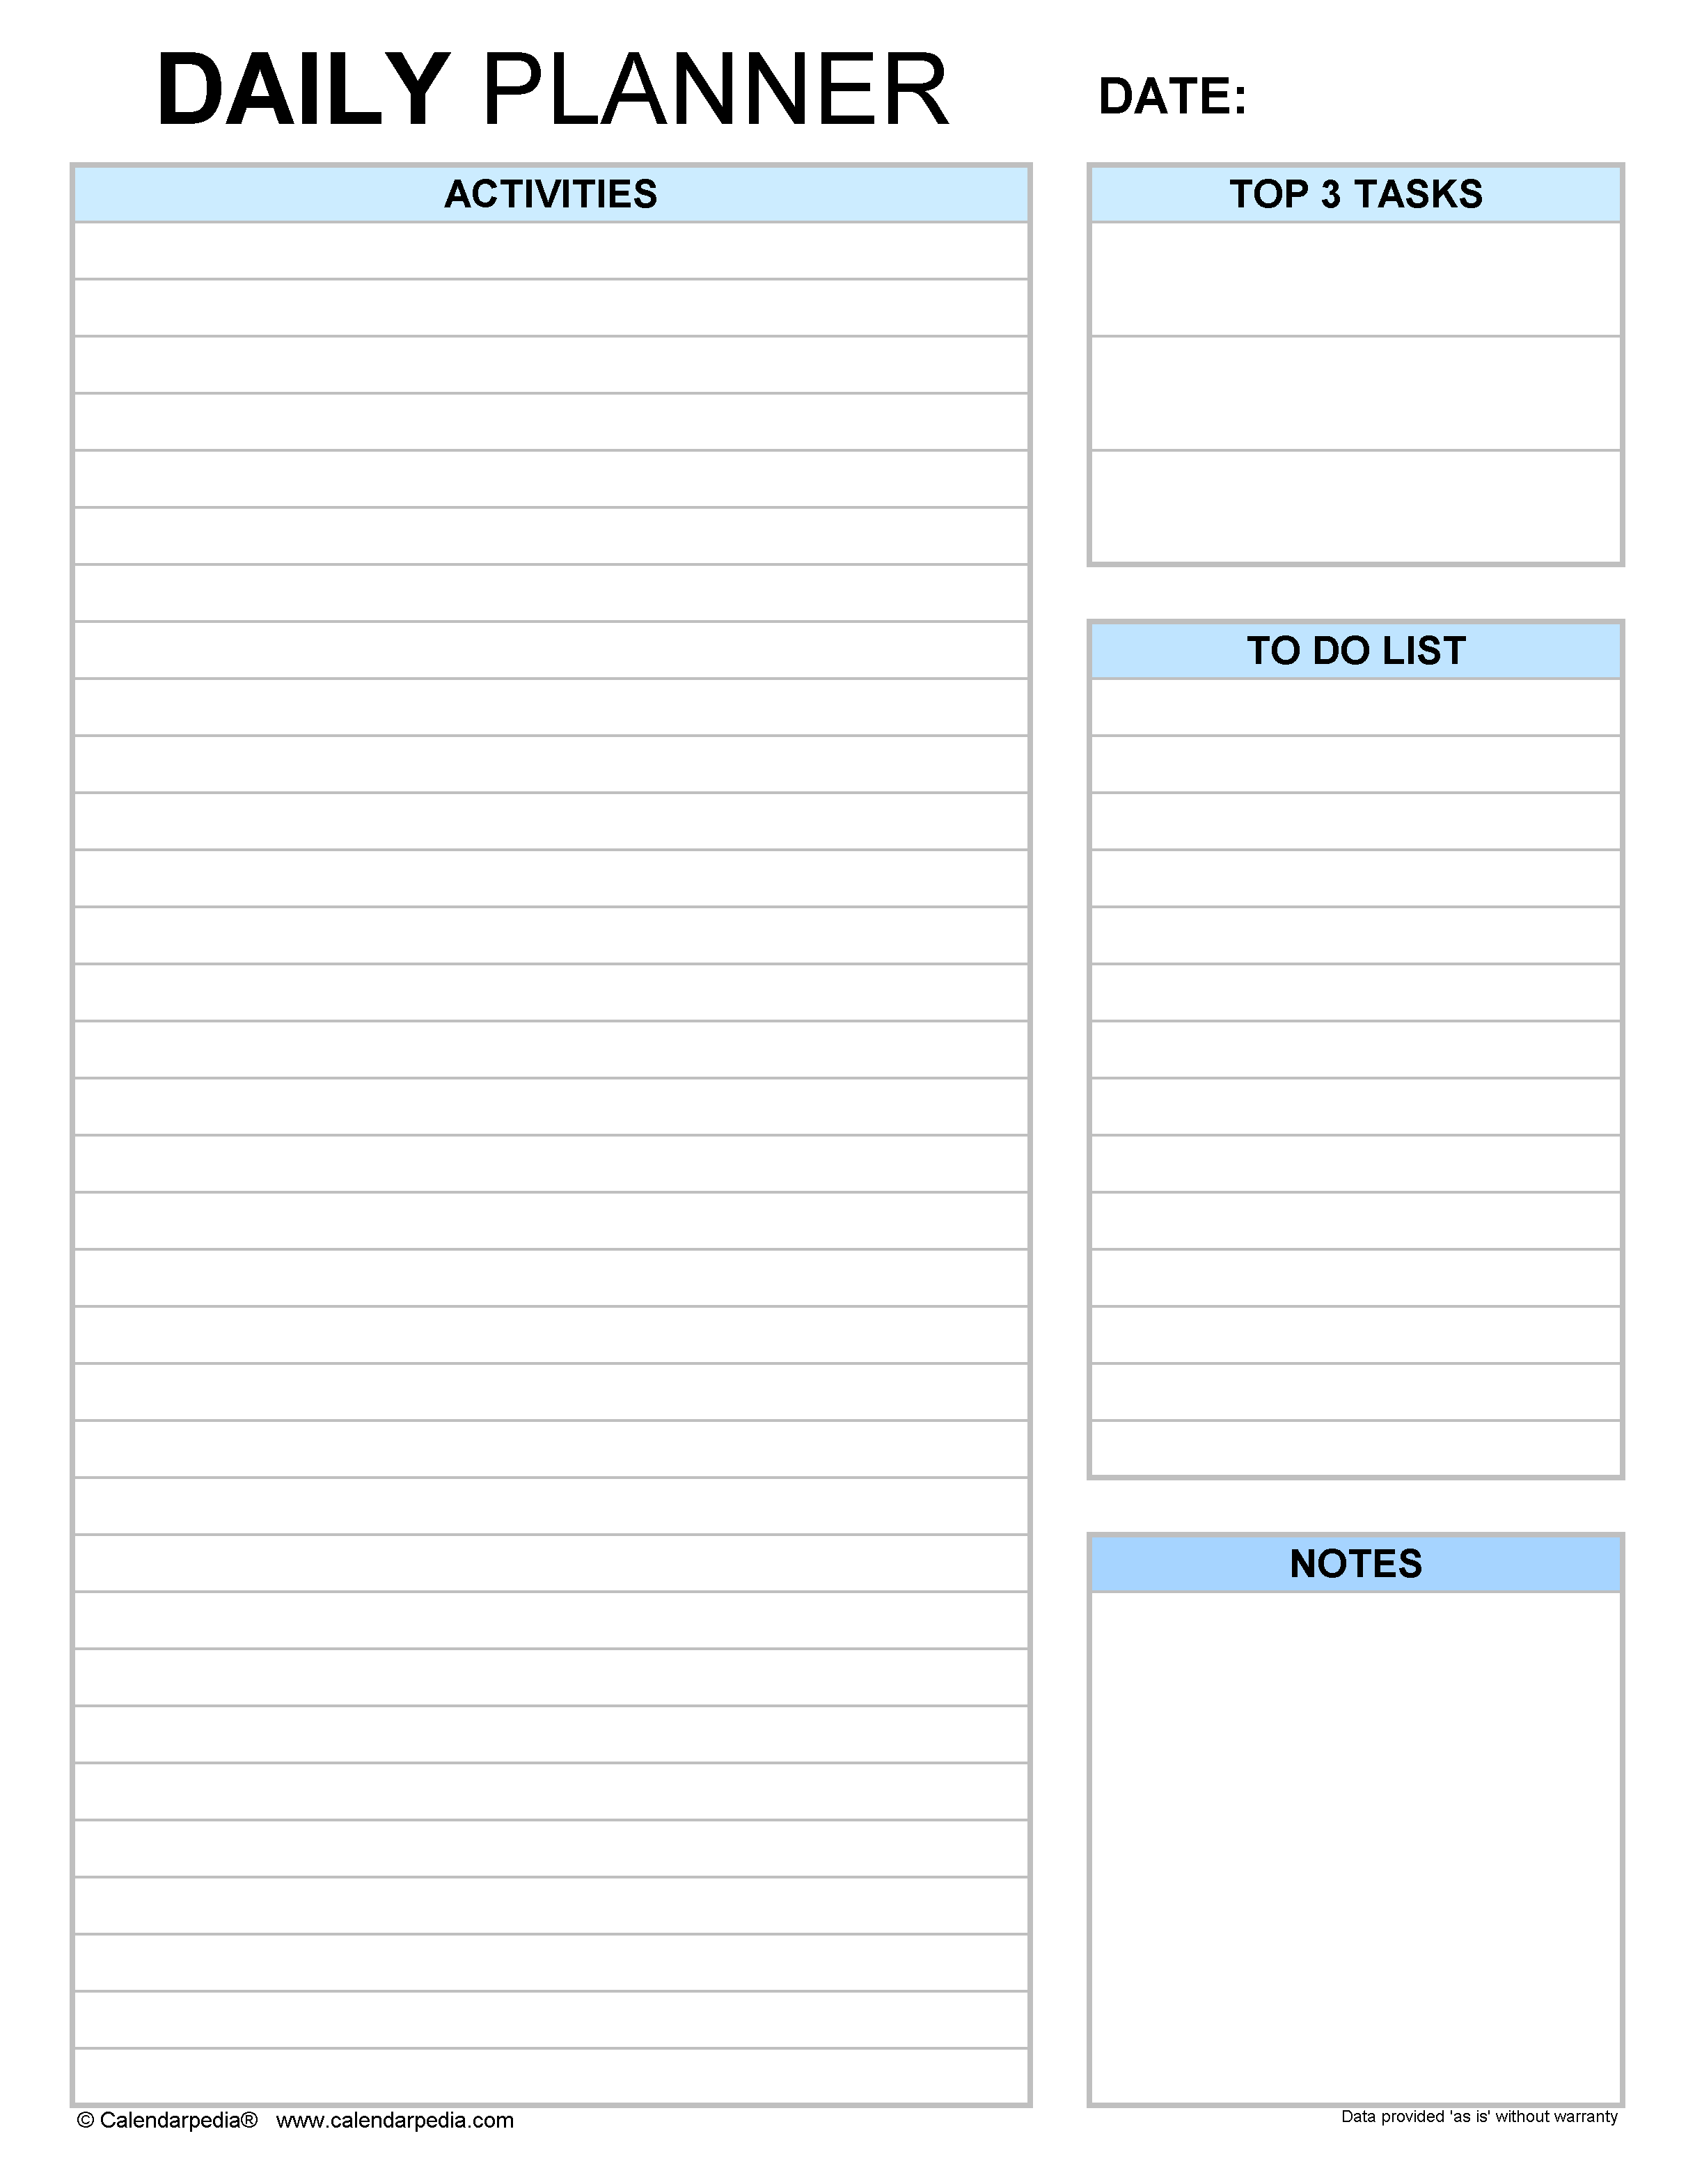 Detail Daily Planner Template Nomer 4